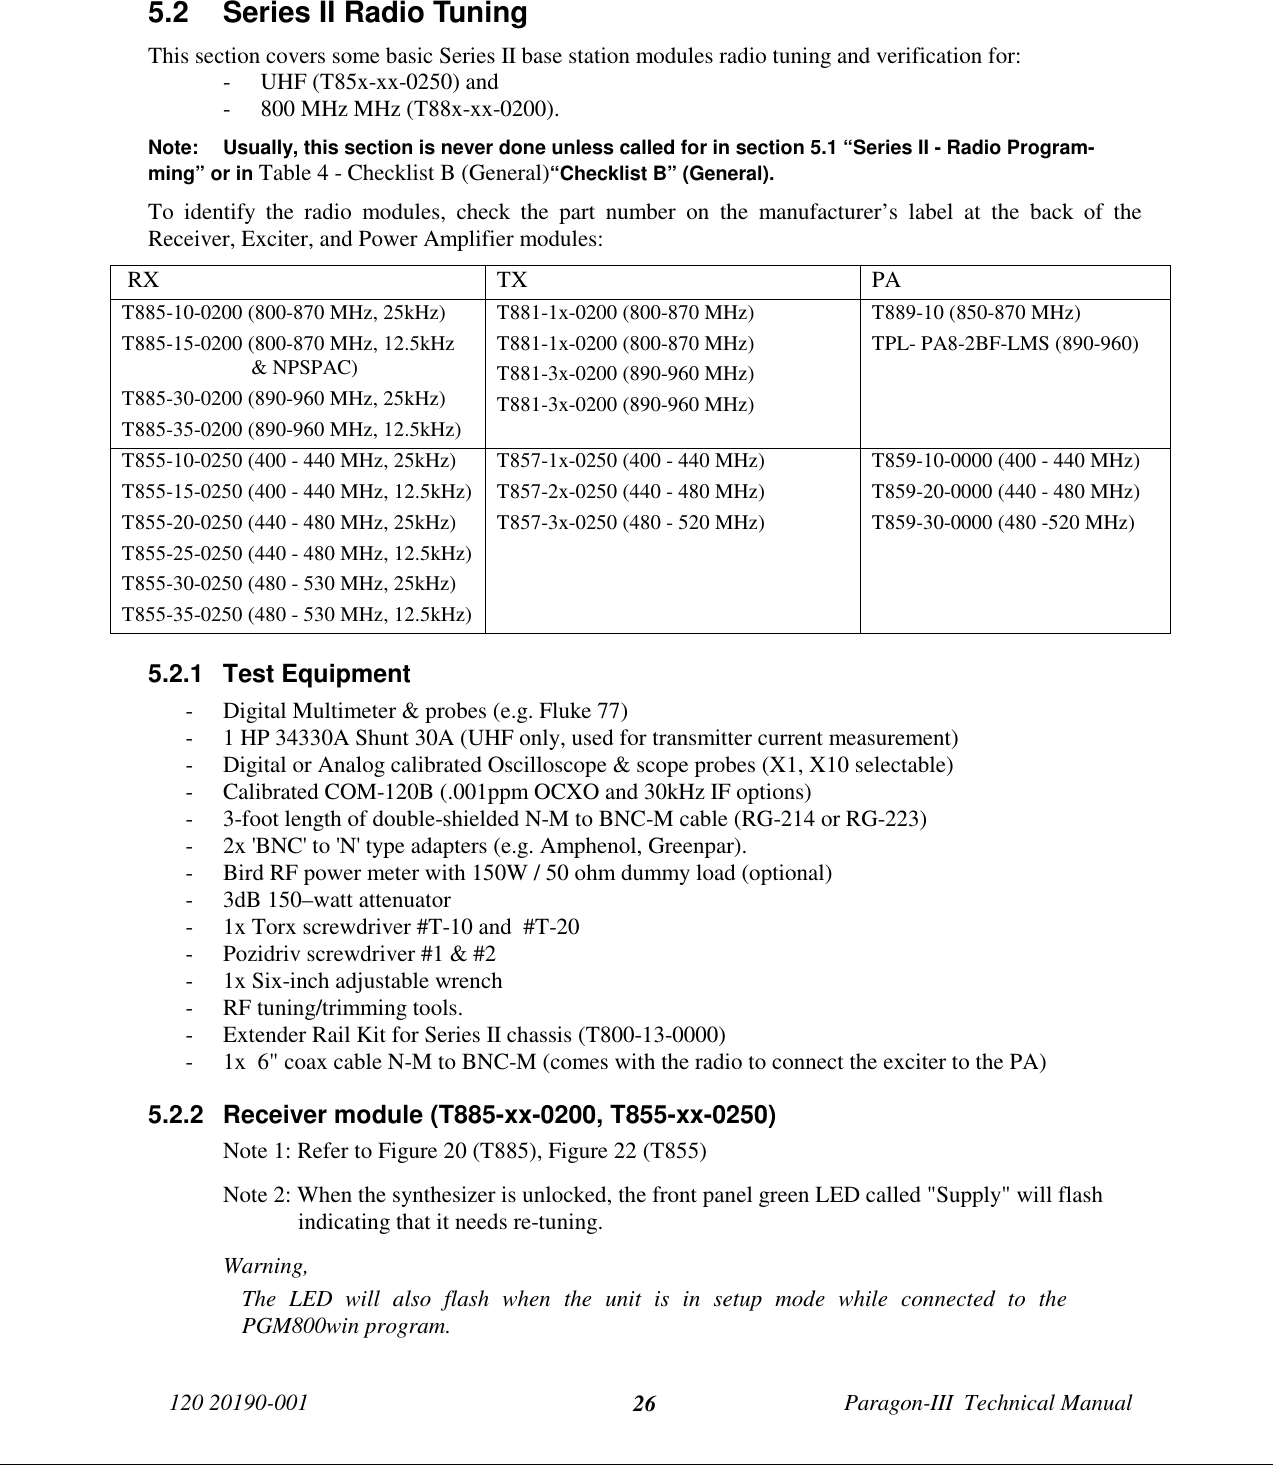 120 20190-001 Paragon-III  Technical Manual265.2  Series II Radio TuningThis section covers some basic Series II base station modules radio tuning and verification for:- UHF (T85x-xx-0250) and- 800 MHz MHz (T88x-xx-0200).Note: Usually, this section is never done unless called for in section 5.1 “Series II - Radio Program-ming” or in Table 4 - Checklist B (General)“Checklist B” (General).To identify the radio modules, check the part number on the manufacturer’s label at the back of theReceiver, Exciter, and Power Amplifier modules: RX TX PAT885-10-0200 (800-870 MHz, 25kHz)T885-15-0200 (800-870 MHz, 12.5kHz&amp; NPSPAC)T885-30-0200 (890-960 MHz, 25kHz)T885-35-0200 (890-960 MHz, 12.5kHz)T881-1x-0200 (800-870 MHz)T881-1x-0200 (800-870 MHz)T881-3x-0200 (890-960 MHz)T881-3x-0200 (890-960 MHz)T889-10 (850-870 MHz)TPL- PA8-2BF-LMS (890-960)T855-10-0250 (400 - 440 MHz, 25kHz)T855-15-0250 (400 - 440 MHz, 12.5kHz)T855-20-0250 (440 - 480 MHz, 25kHz)T855-25-0250 (440 - 480 MHz, 12.5kHz)T855-30-0250 (480 - 530 MHz, 25kHz)T855-35-0250 (480 - 530 MHz, 12.5kHz)T857-1x-0250 (400 - 440 MHz)T857-2x-0250 (440 - 480 MHz)T857-3x-0250 (480 - 520 MHz)T859-10-0000 (400 - 440 MHz)T859-20-0000 (440 - 480 MHz)T859-30-0000 (480 -520 MHz)5.2.1 Test Equipment- Digital Multimeter &amp; probes (e.g. Fluke 77)- 1 HP 34330A Shunt 30A (UHF only, used for transmitter current measurement)- Digital or Analog calibrated Oscilloscope &amp; scope probes (X1, X10 selectable)- Calibrated COM-120B (.001ppm OCXO and 30kHz IF options)- 3-foot length of double-shielded N-M to BNC-M cable (RG-214 or RG-223)- 2x &apos;BNC&apos; to &apos;N&apos; type adapters (e.g. Amphenol, Greenpar).- Bird RF power meter with 150W / 50 ohm dummy load (optional)- 3dB 150–watt attenuator- 1x Torx screwdriver #T-10 and  #T-20- Pozidriv screwdriver #1 &amp; #2- 1x Six-inch adjustable wrench- RF tuning/trimming tools.- Extender Rail Kit for Series II chassis (T800-13-0000)- 1x  6&quot; coax cable N-M to BNC-M (comes with the radio to connect the exciter to the PA)5.2.2  Receiver module (T885-xx-0200, T855-xx-0250)Note 1: Refer to Figure 20 (T885), Figure 22 (T855)Note 2: When the synthesizer is unlocked, the front panel green LED called &quot;Supply&quot; will flashindicating that it needs re-tuning.Warning,The LED will also flash when the unit is in setup mode while connected to thePGM800win program.